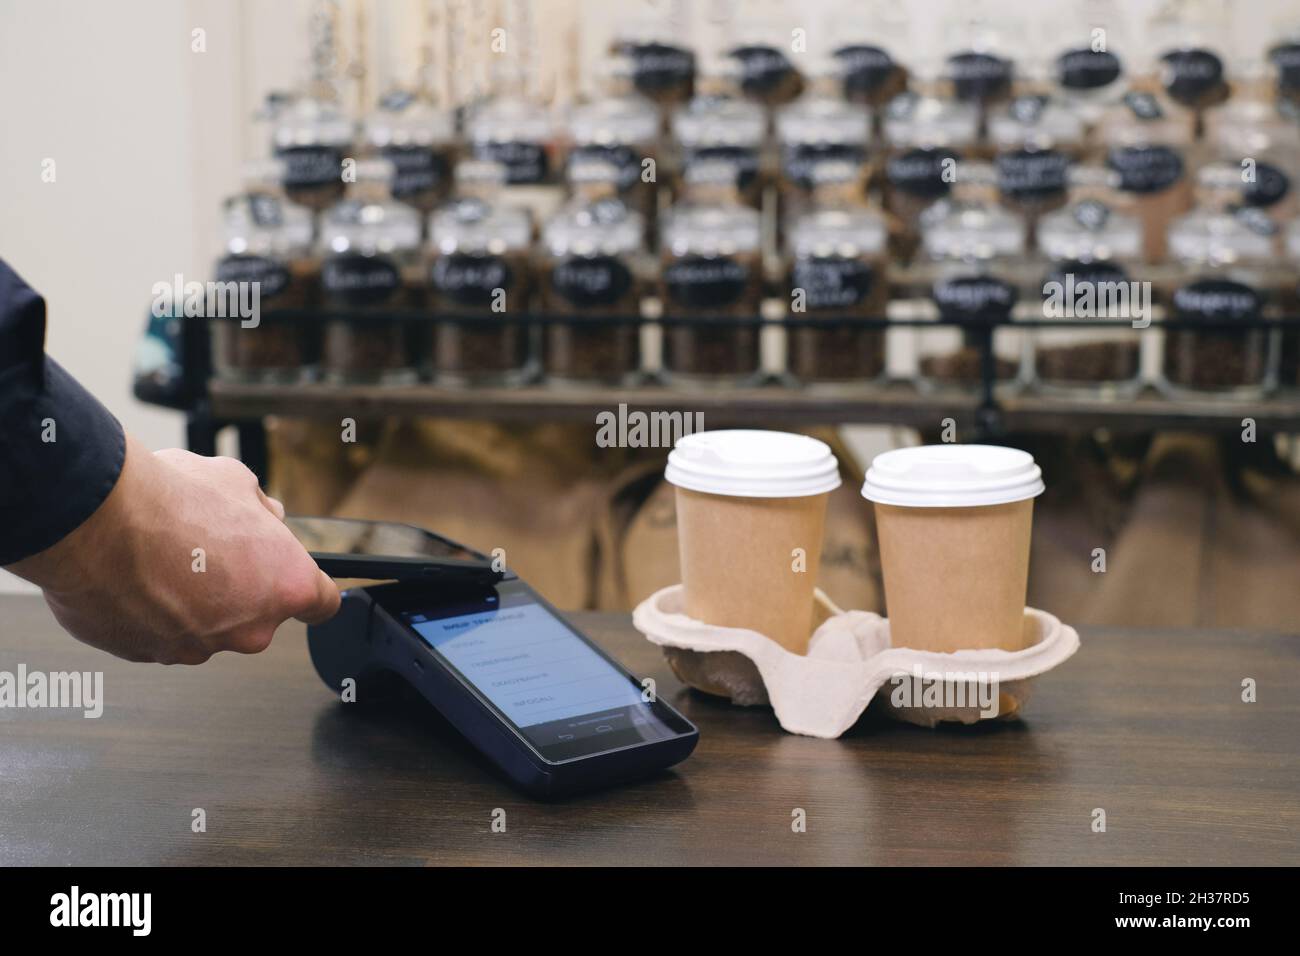 Customer using smartphone and nfs technology to pay barista for purchase with phone at a cafe for coffee. Safe transaction  Stock Photo